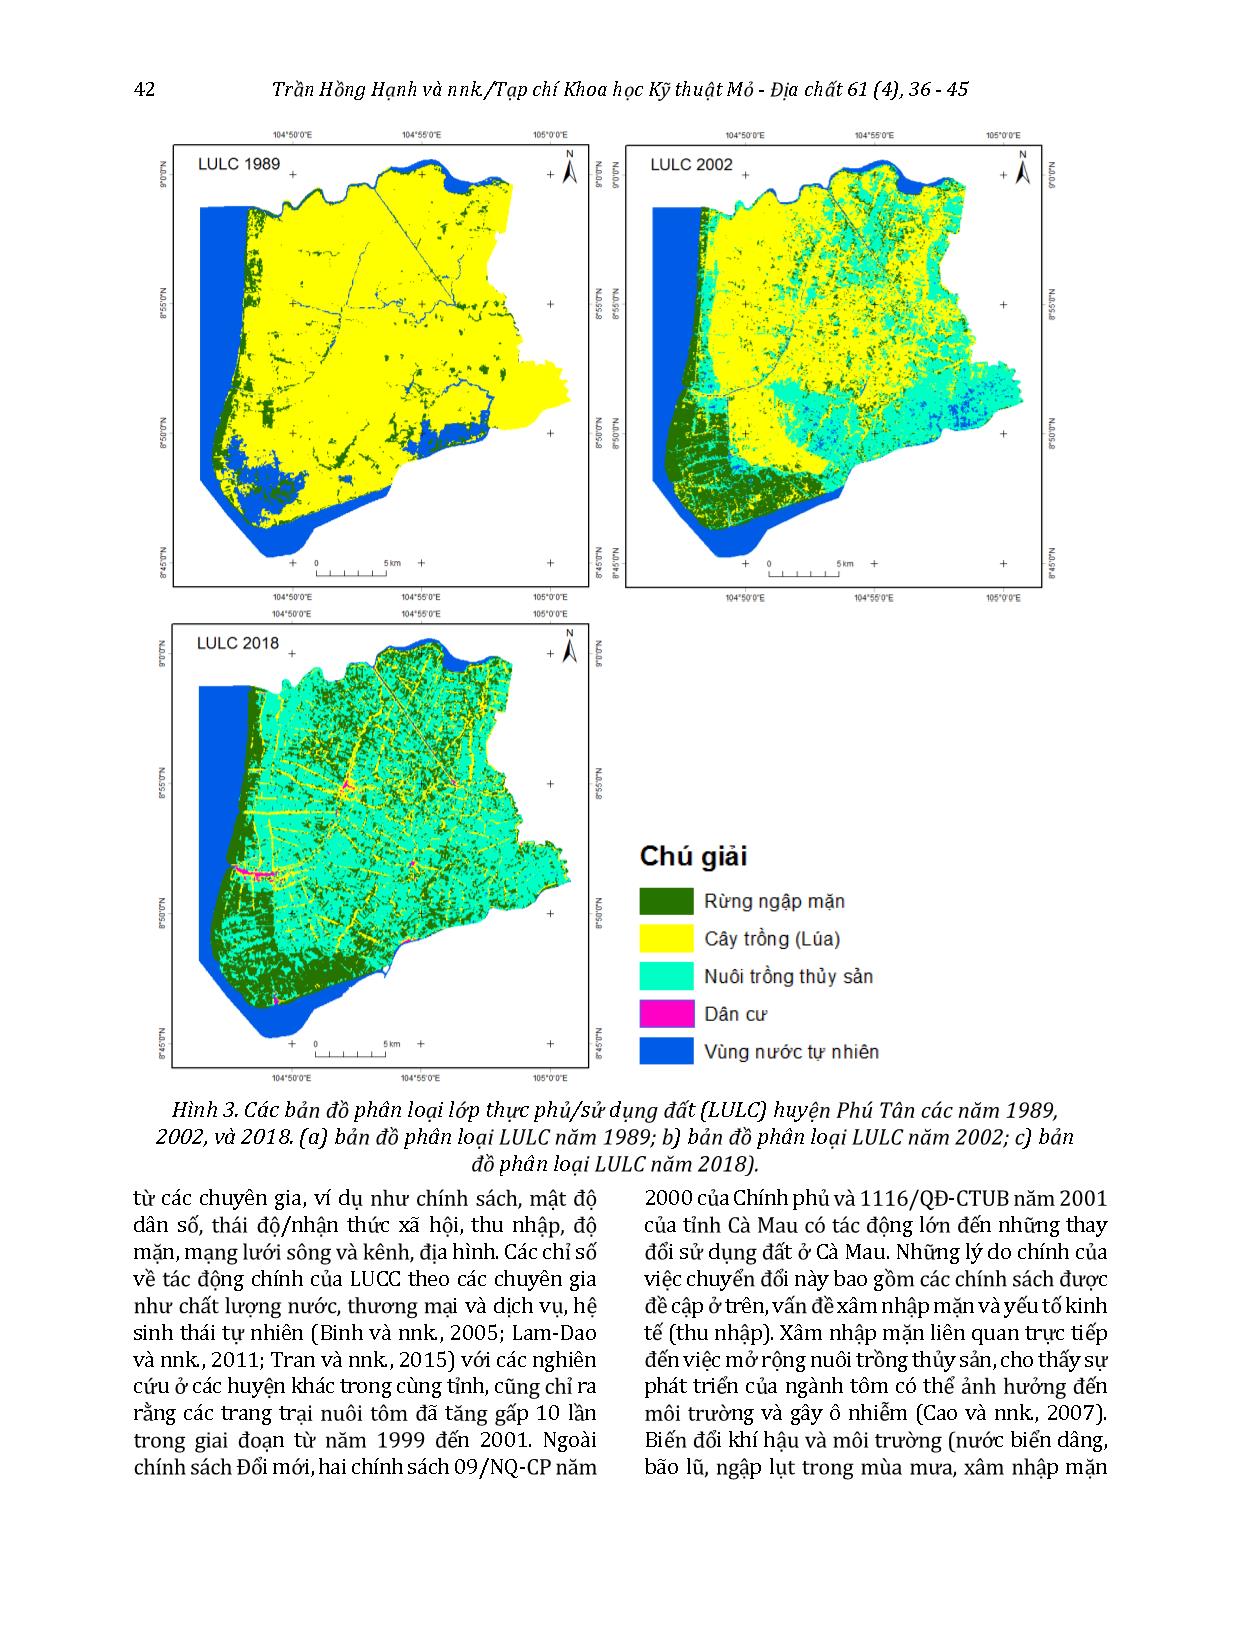 Study on land use changes, causes and impacts by remote sensing, GIS and Delphi methods in the coastal area of Ca Mau province in 30 years trang 7